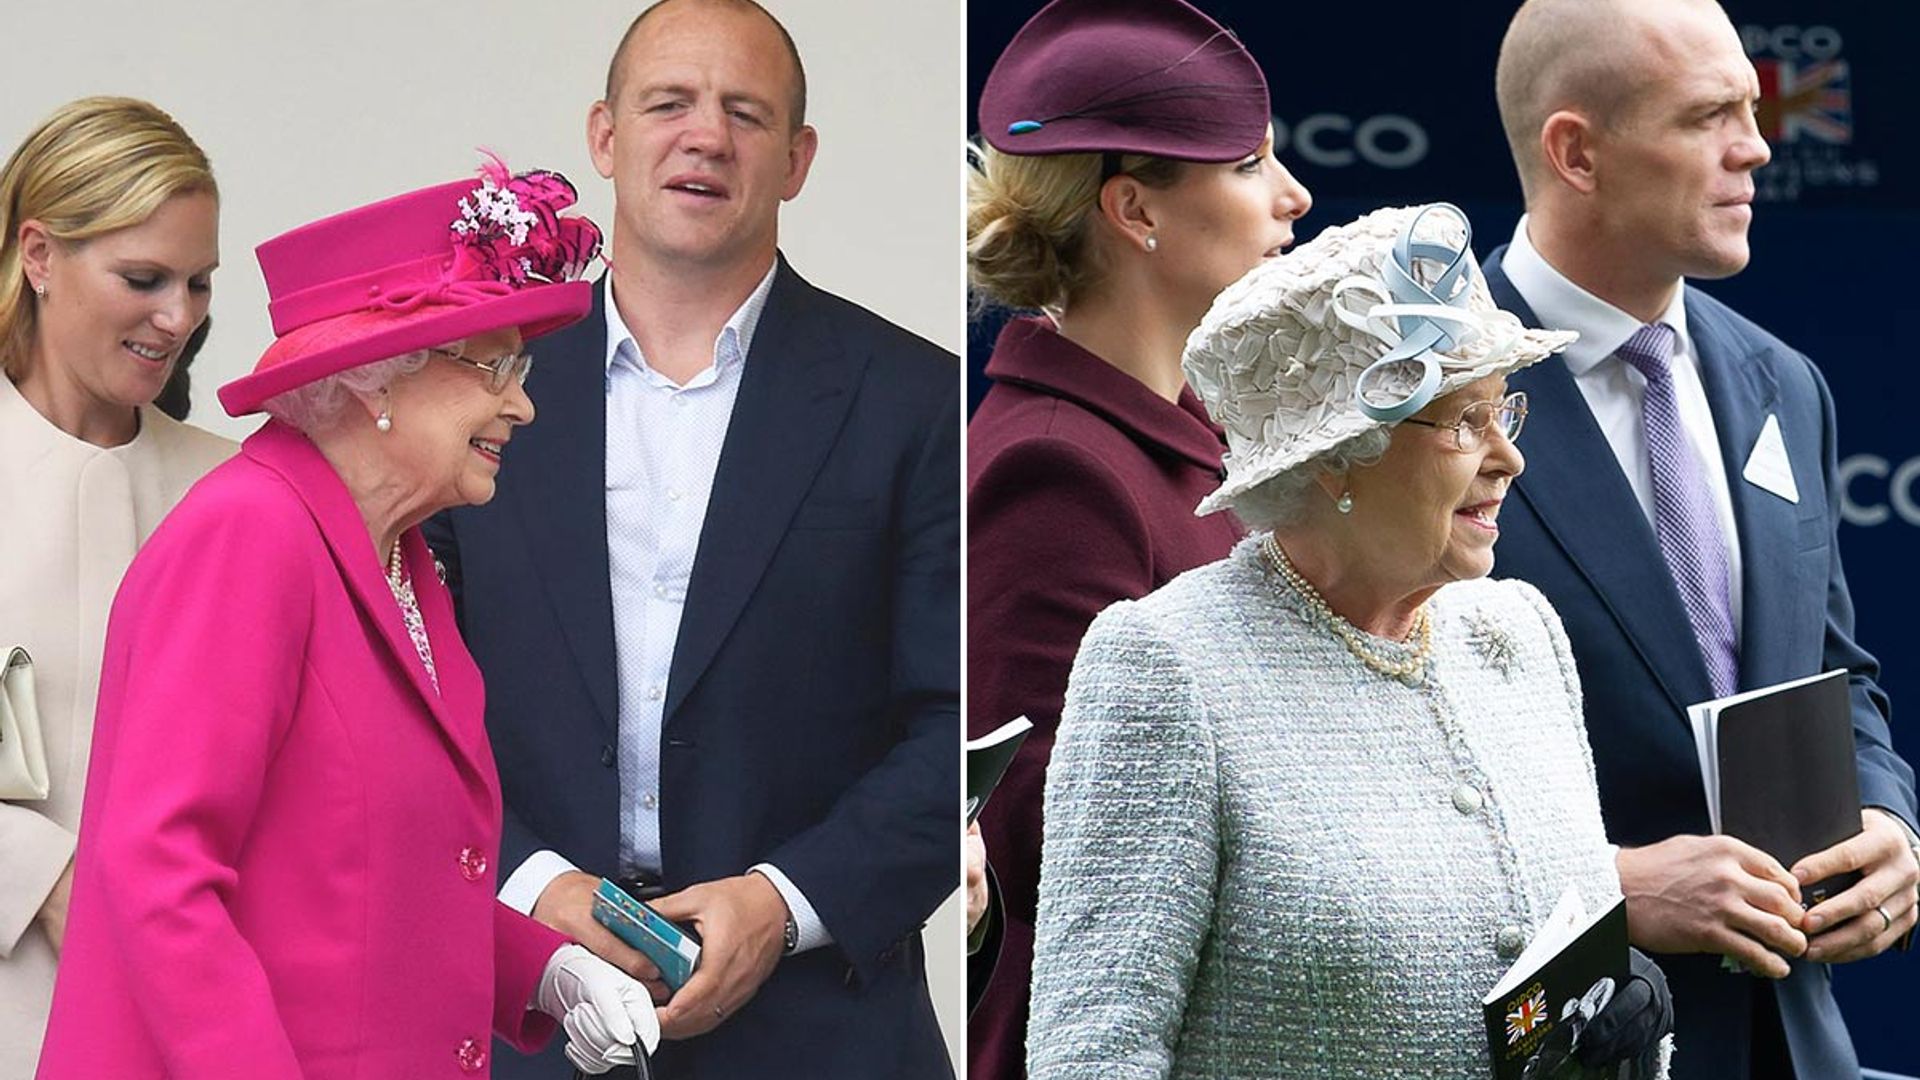 Mike Tindall's sweet relationship with the Queen revealed